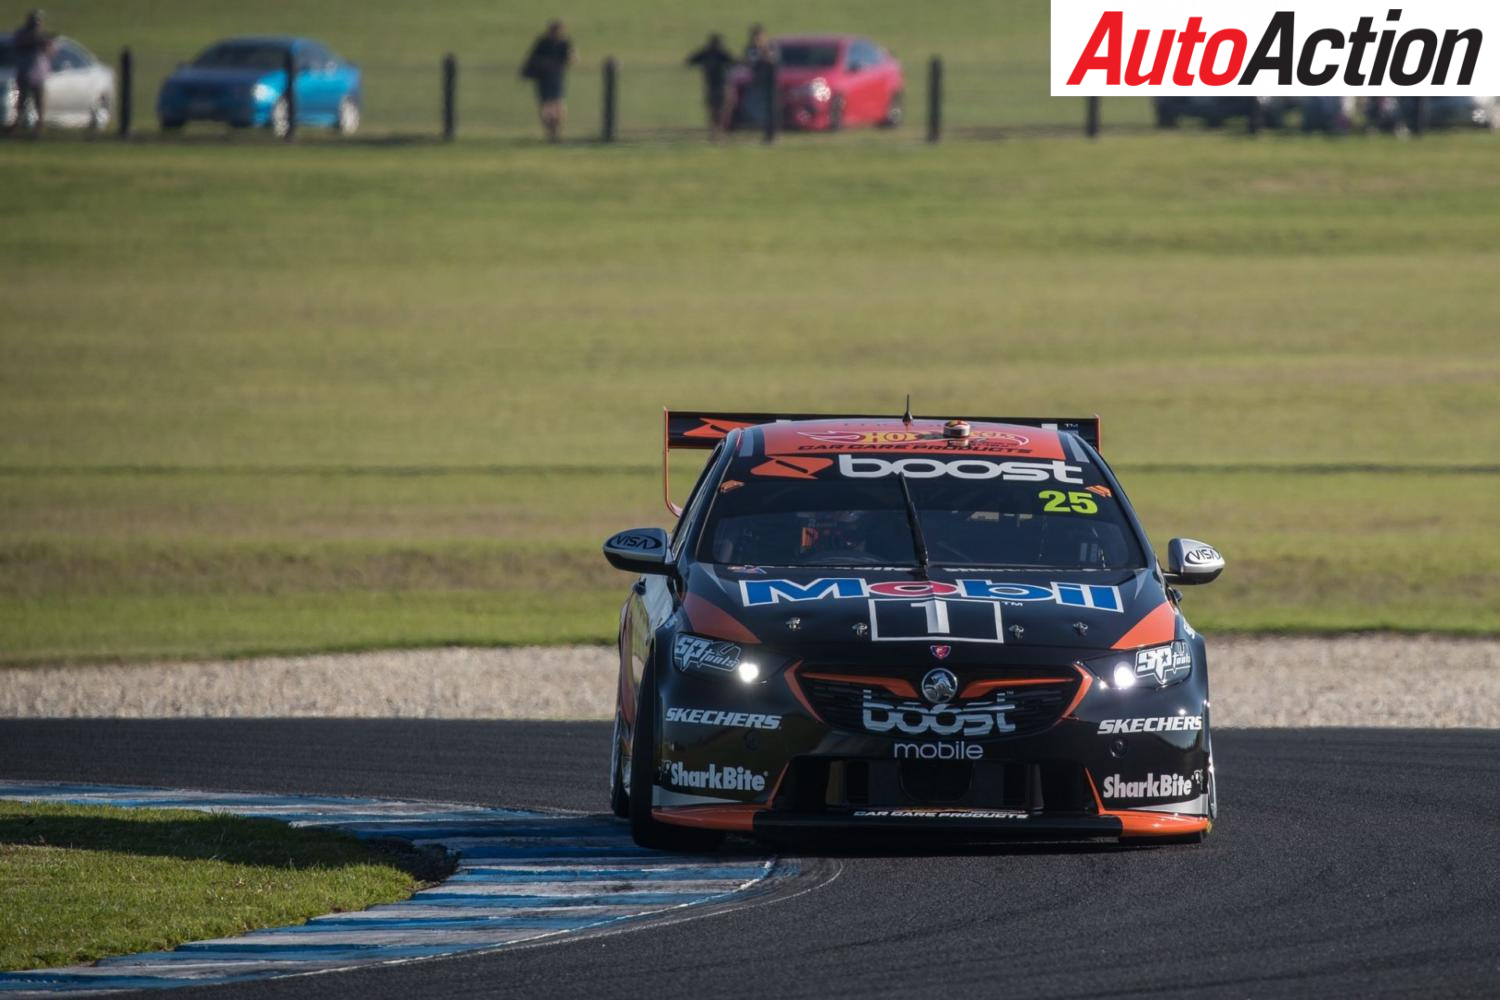 James Courtney topped the opening practice session at Phillip Island - Photo: Rhys Vandersyde